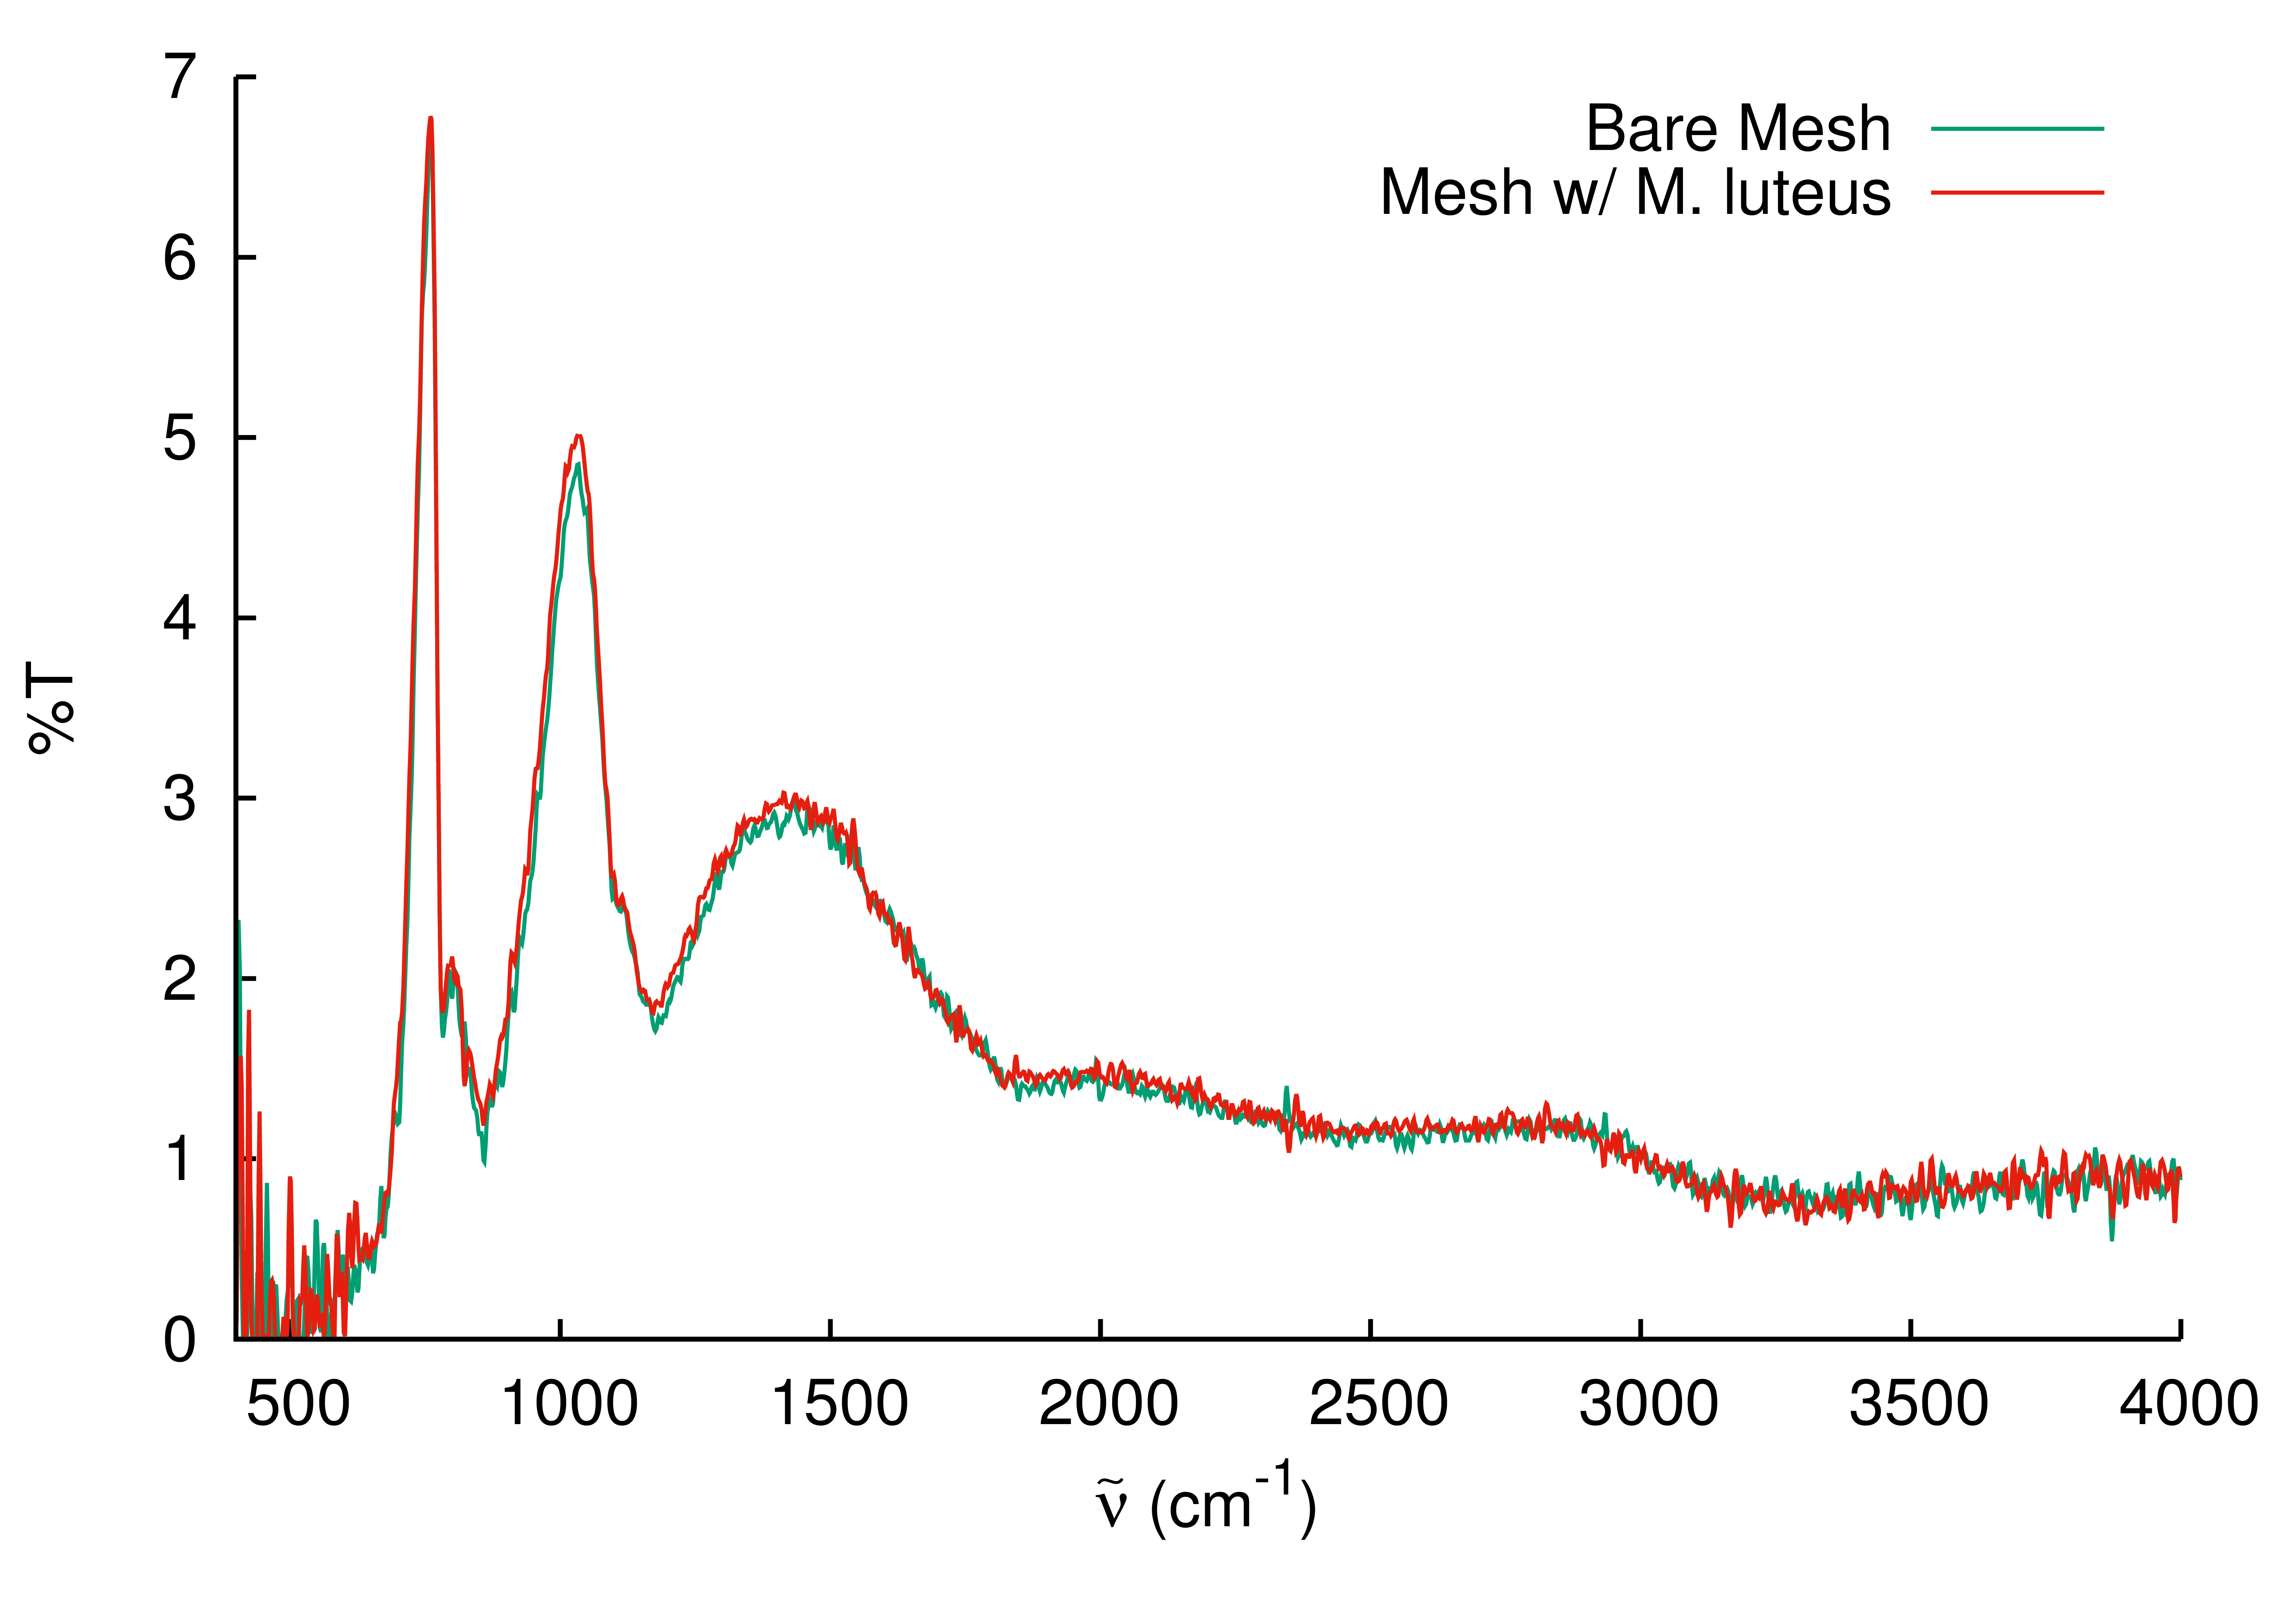 Transmission spectrum of a mesh with and without M. luteus.